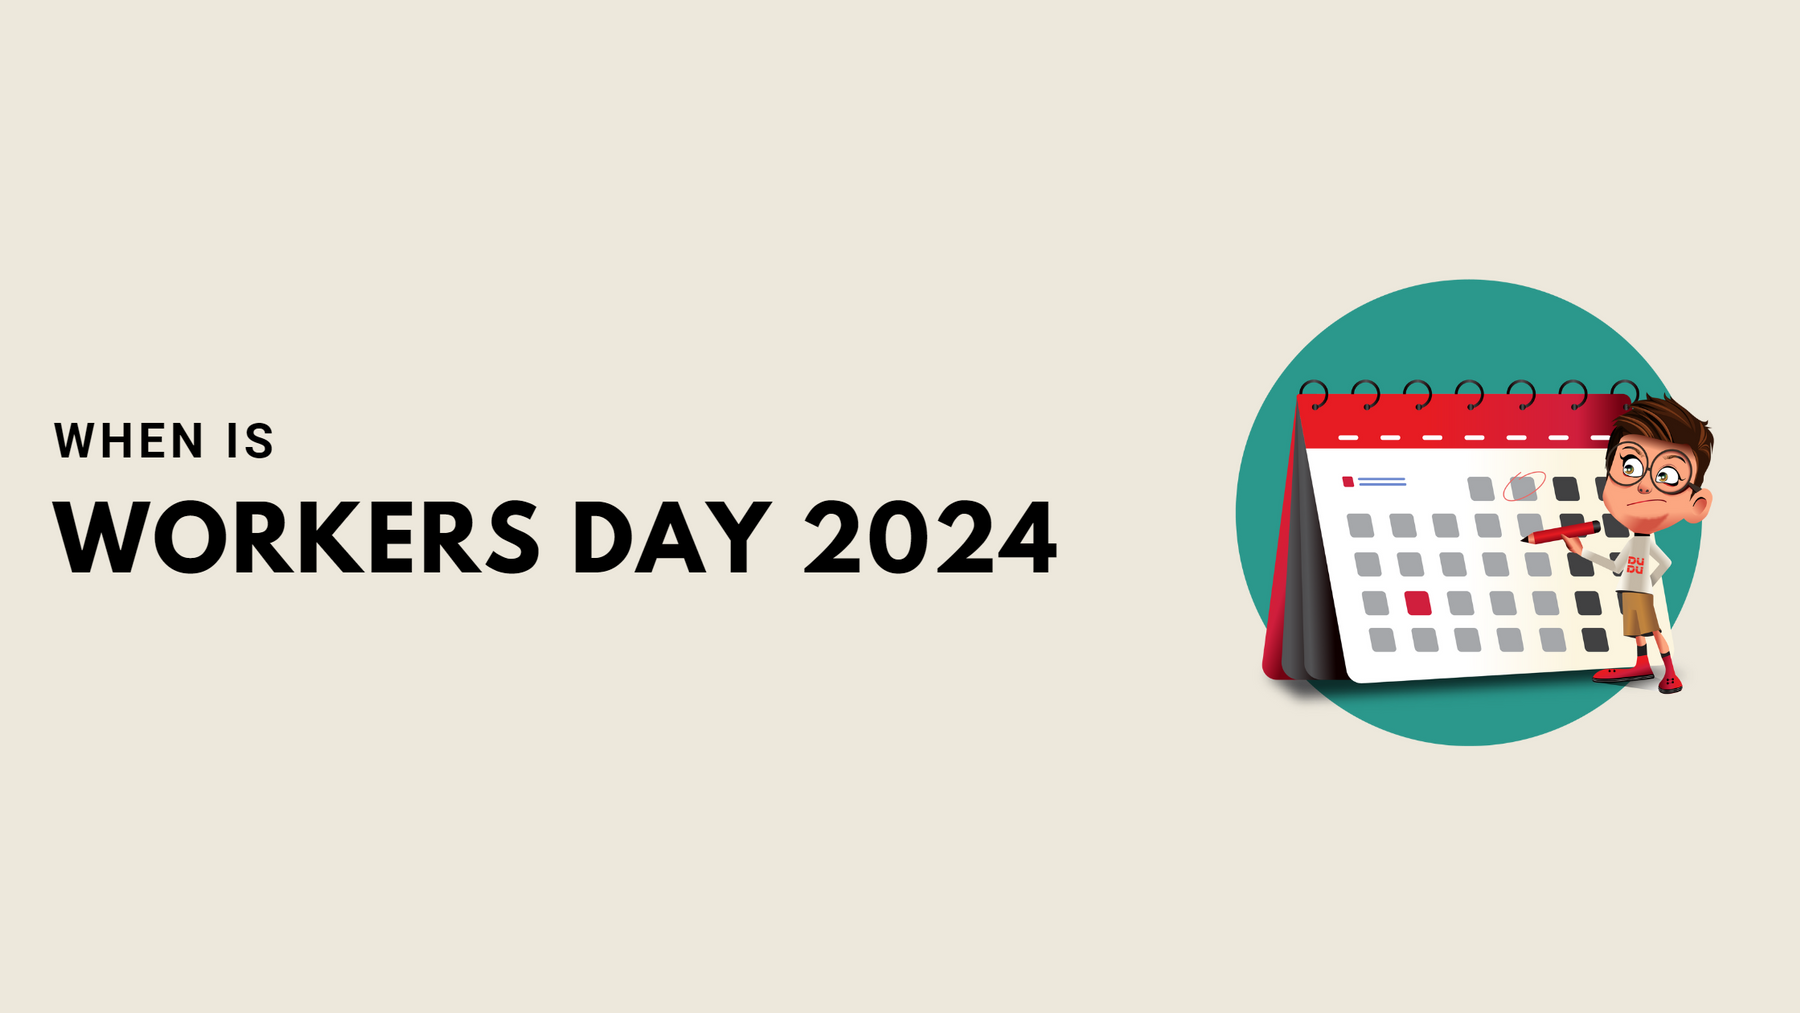 When Is Workers Day 2024?